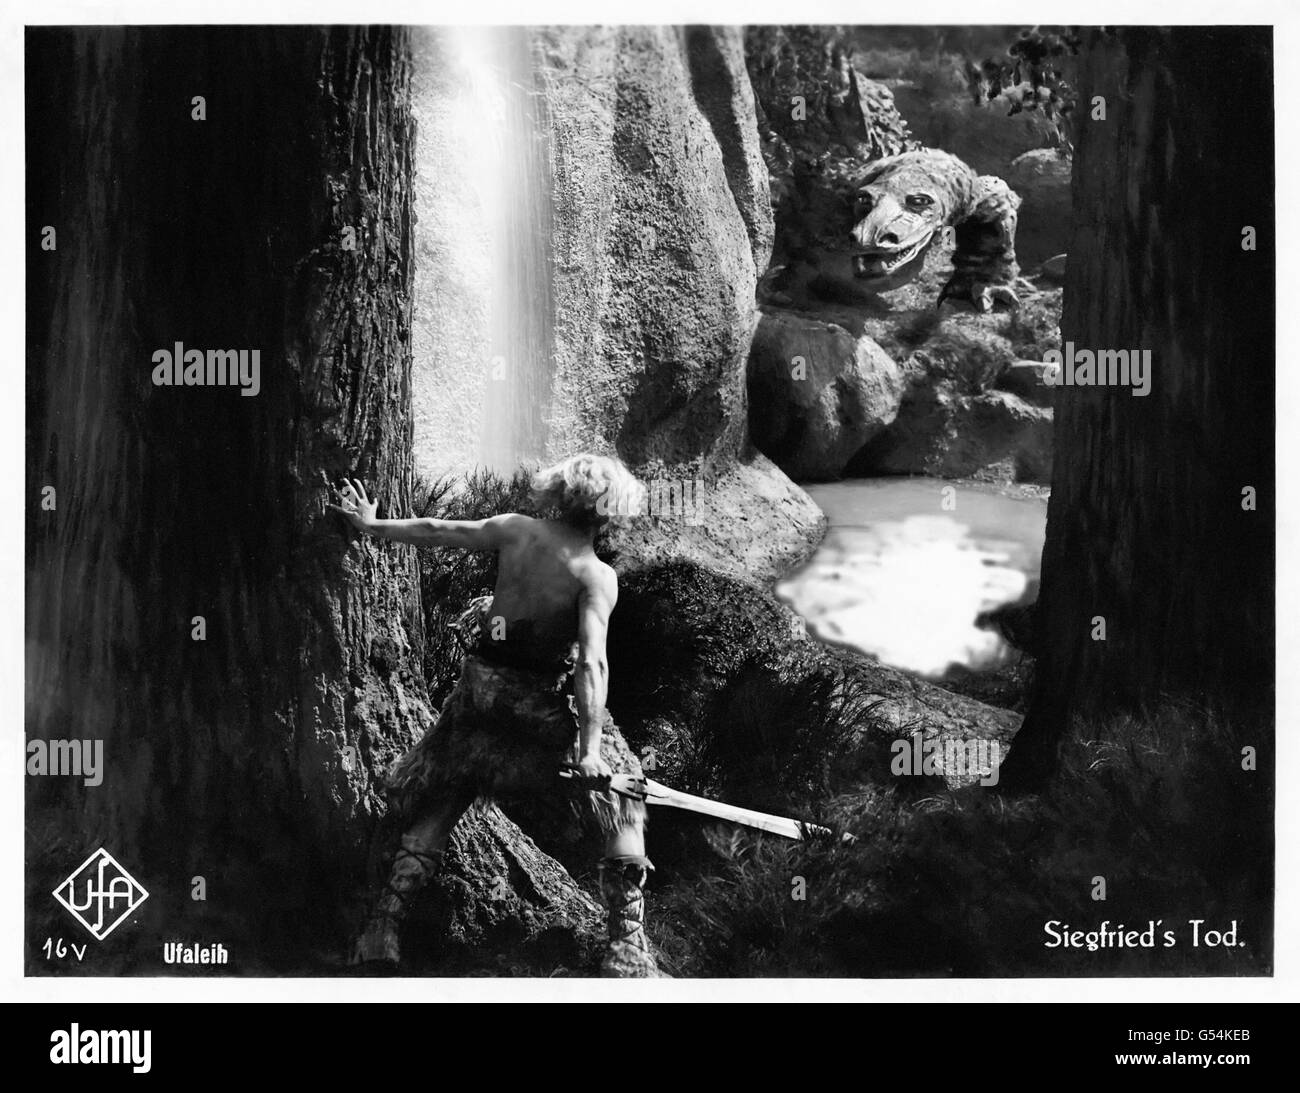 ‘Die Nibelungen: Siegfried’ 1924 German fantasy film directed by Fritz Lang (1890-1976) original lobby card showing Siegfried’s (Paul Richter) encounter with the magical dragon in the wood. Stock Photo